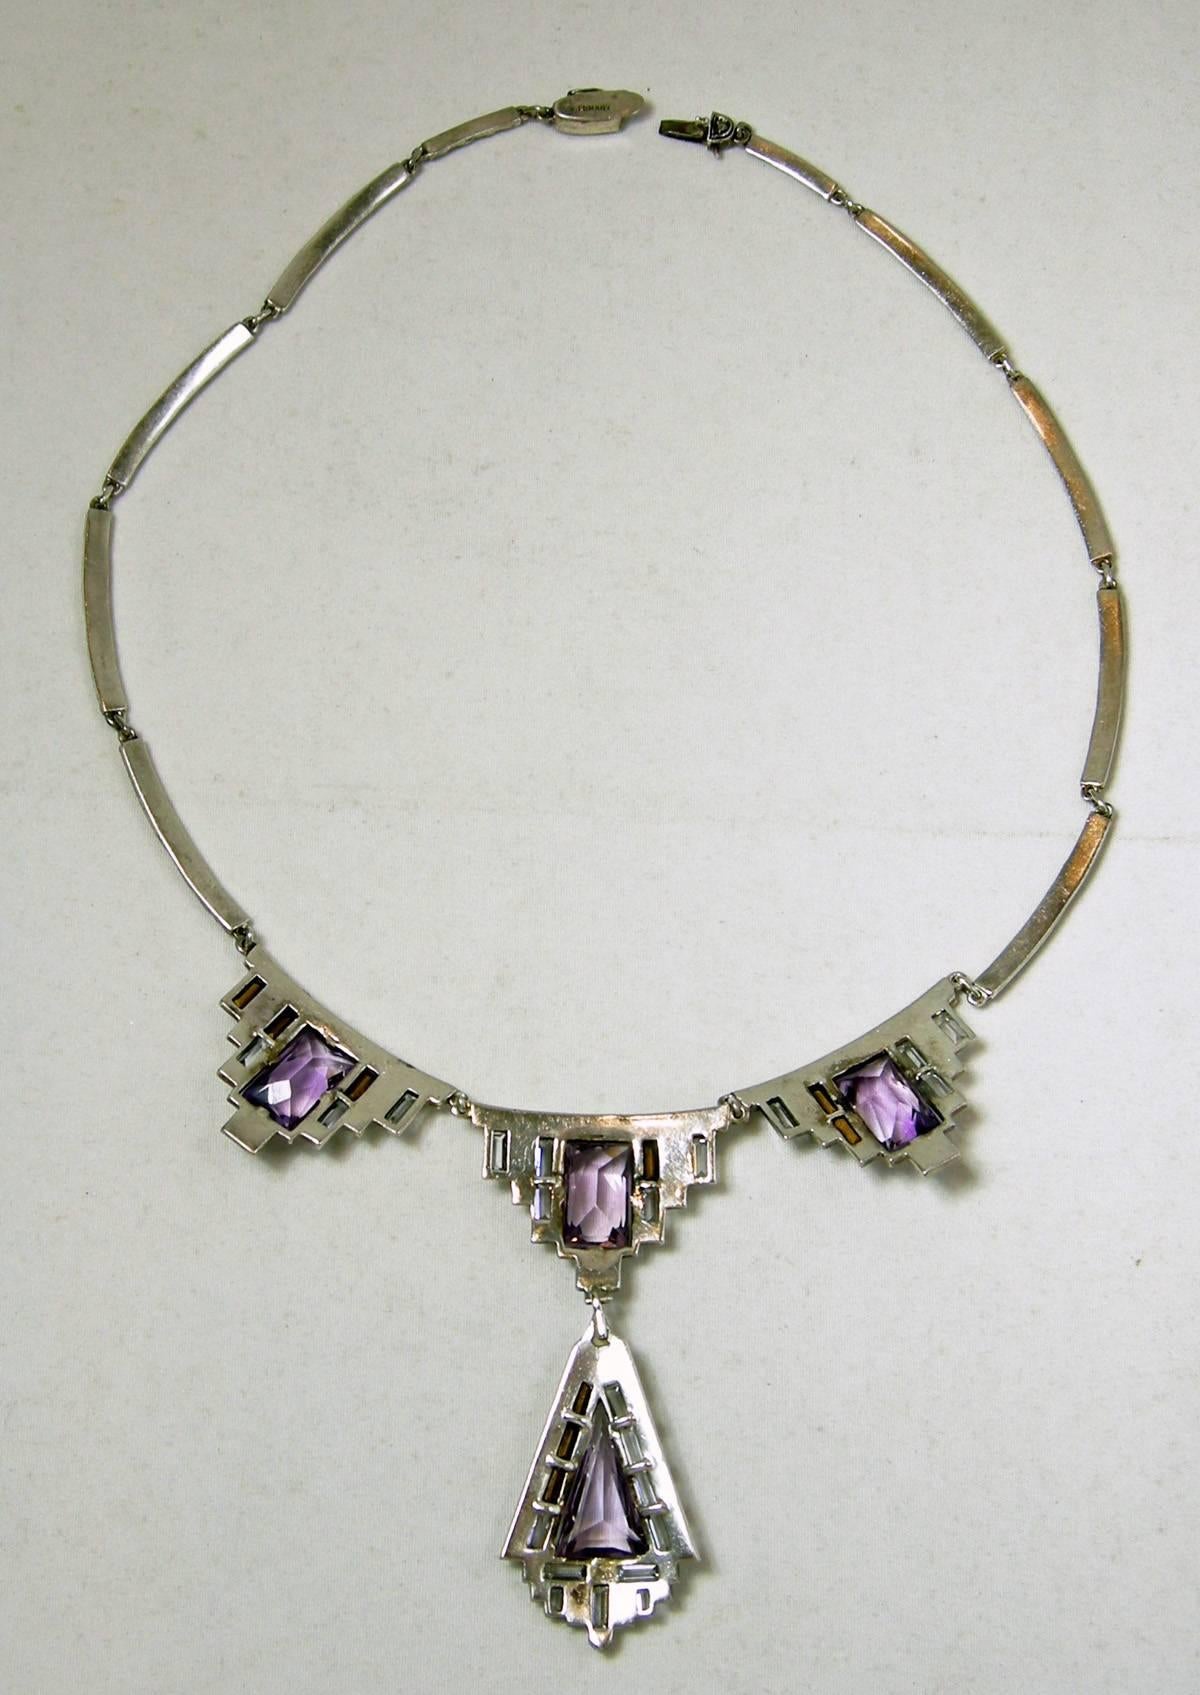 This highly collectible early German vintage necklace has triangular and square shaped amethyst stones that are prong set. The pendants have beautiful baguette stones and marcasites all around it. The necklace is made of sterling silver and measures